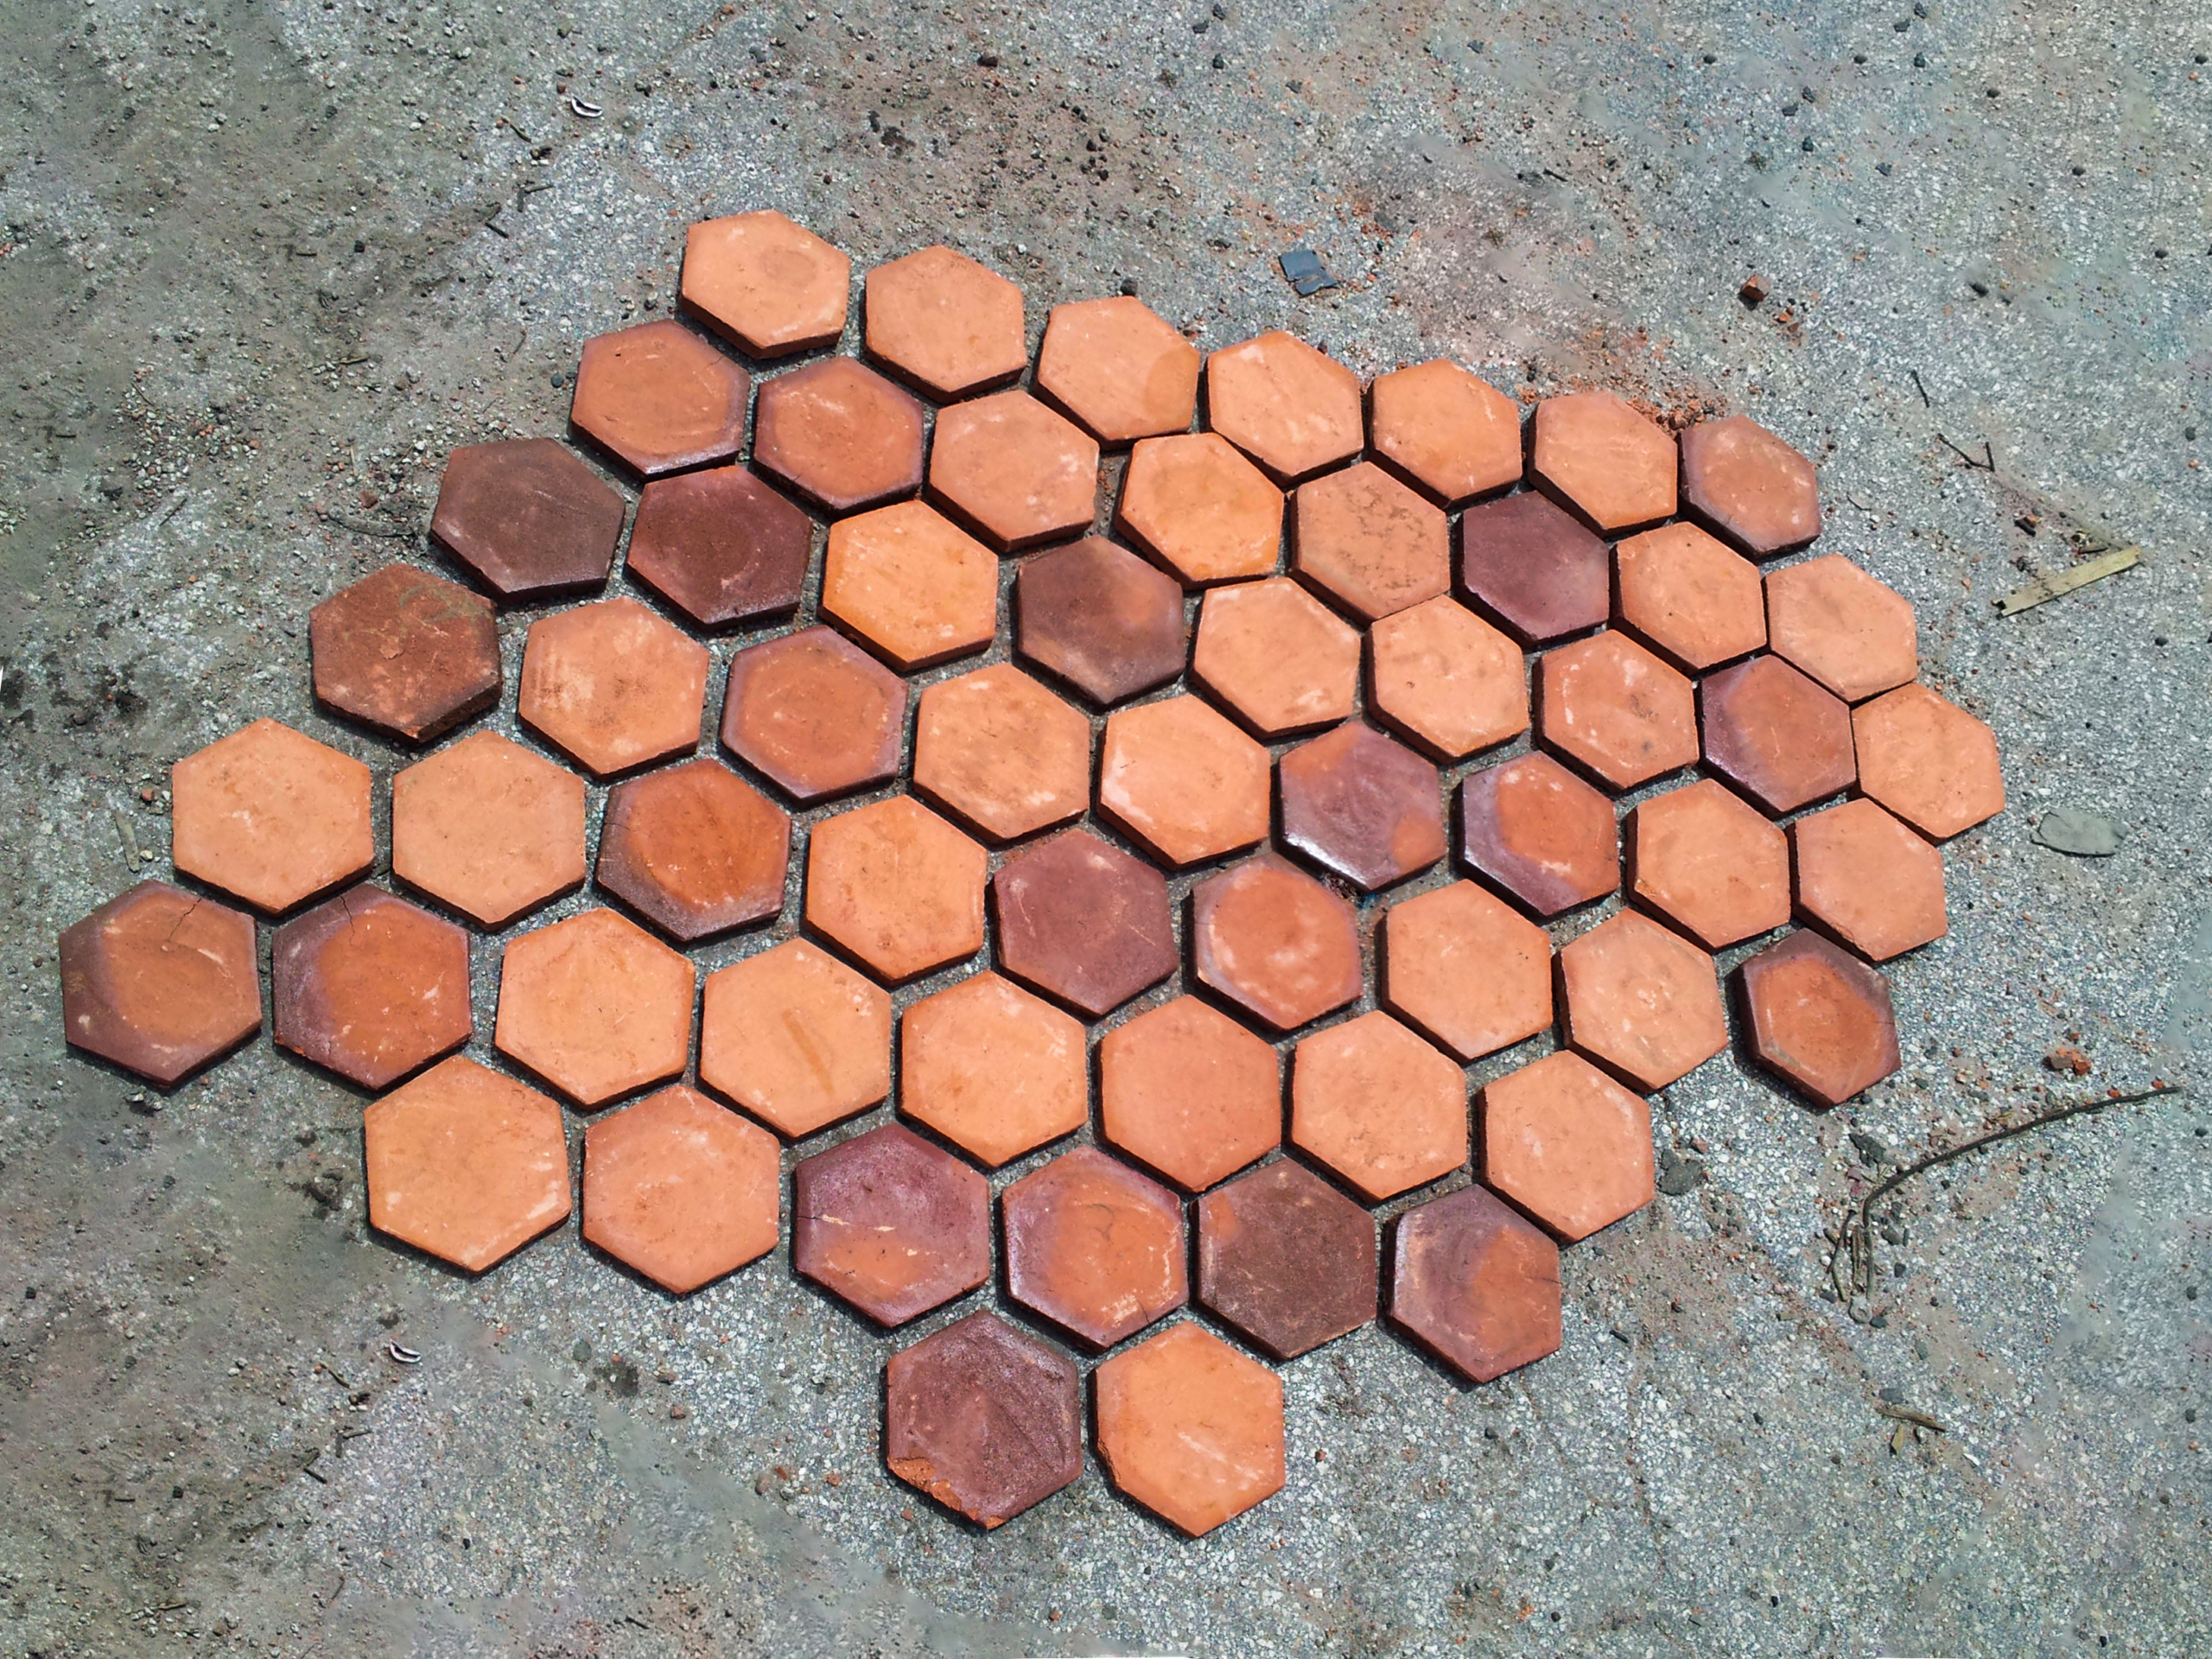 A group of orange hexagon tiles laid out on the ground.